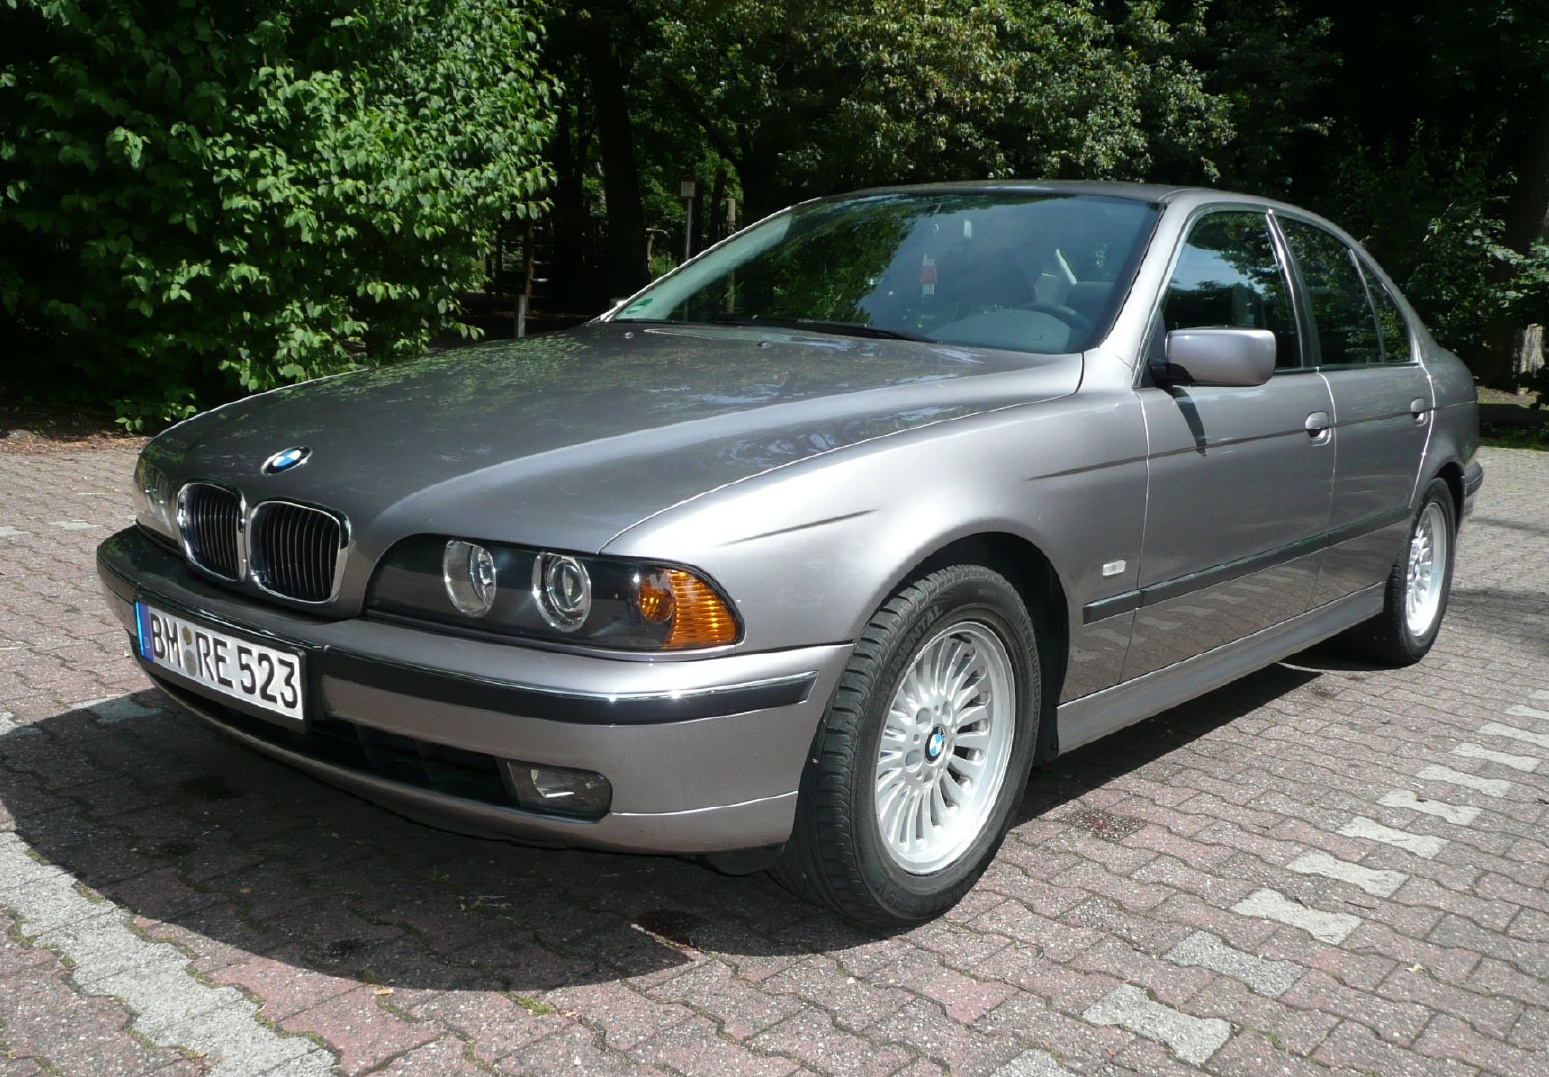 1996 BMW 523i E39 related infomation,specifications